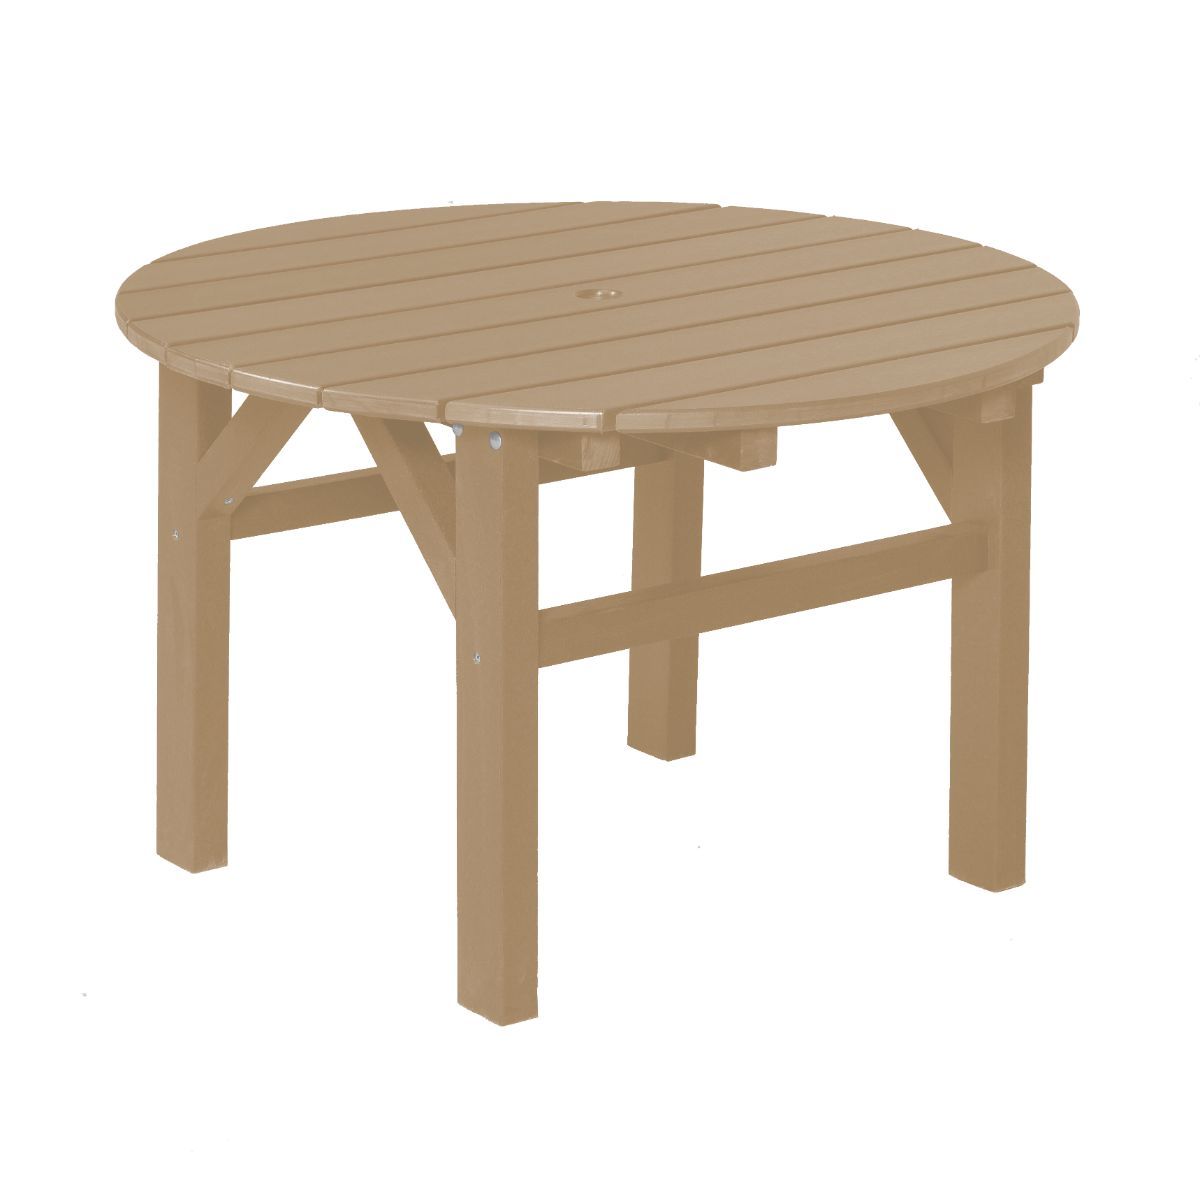 Weathered Wood Odessa Outdoor Coffee Table